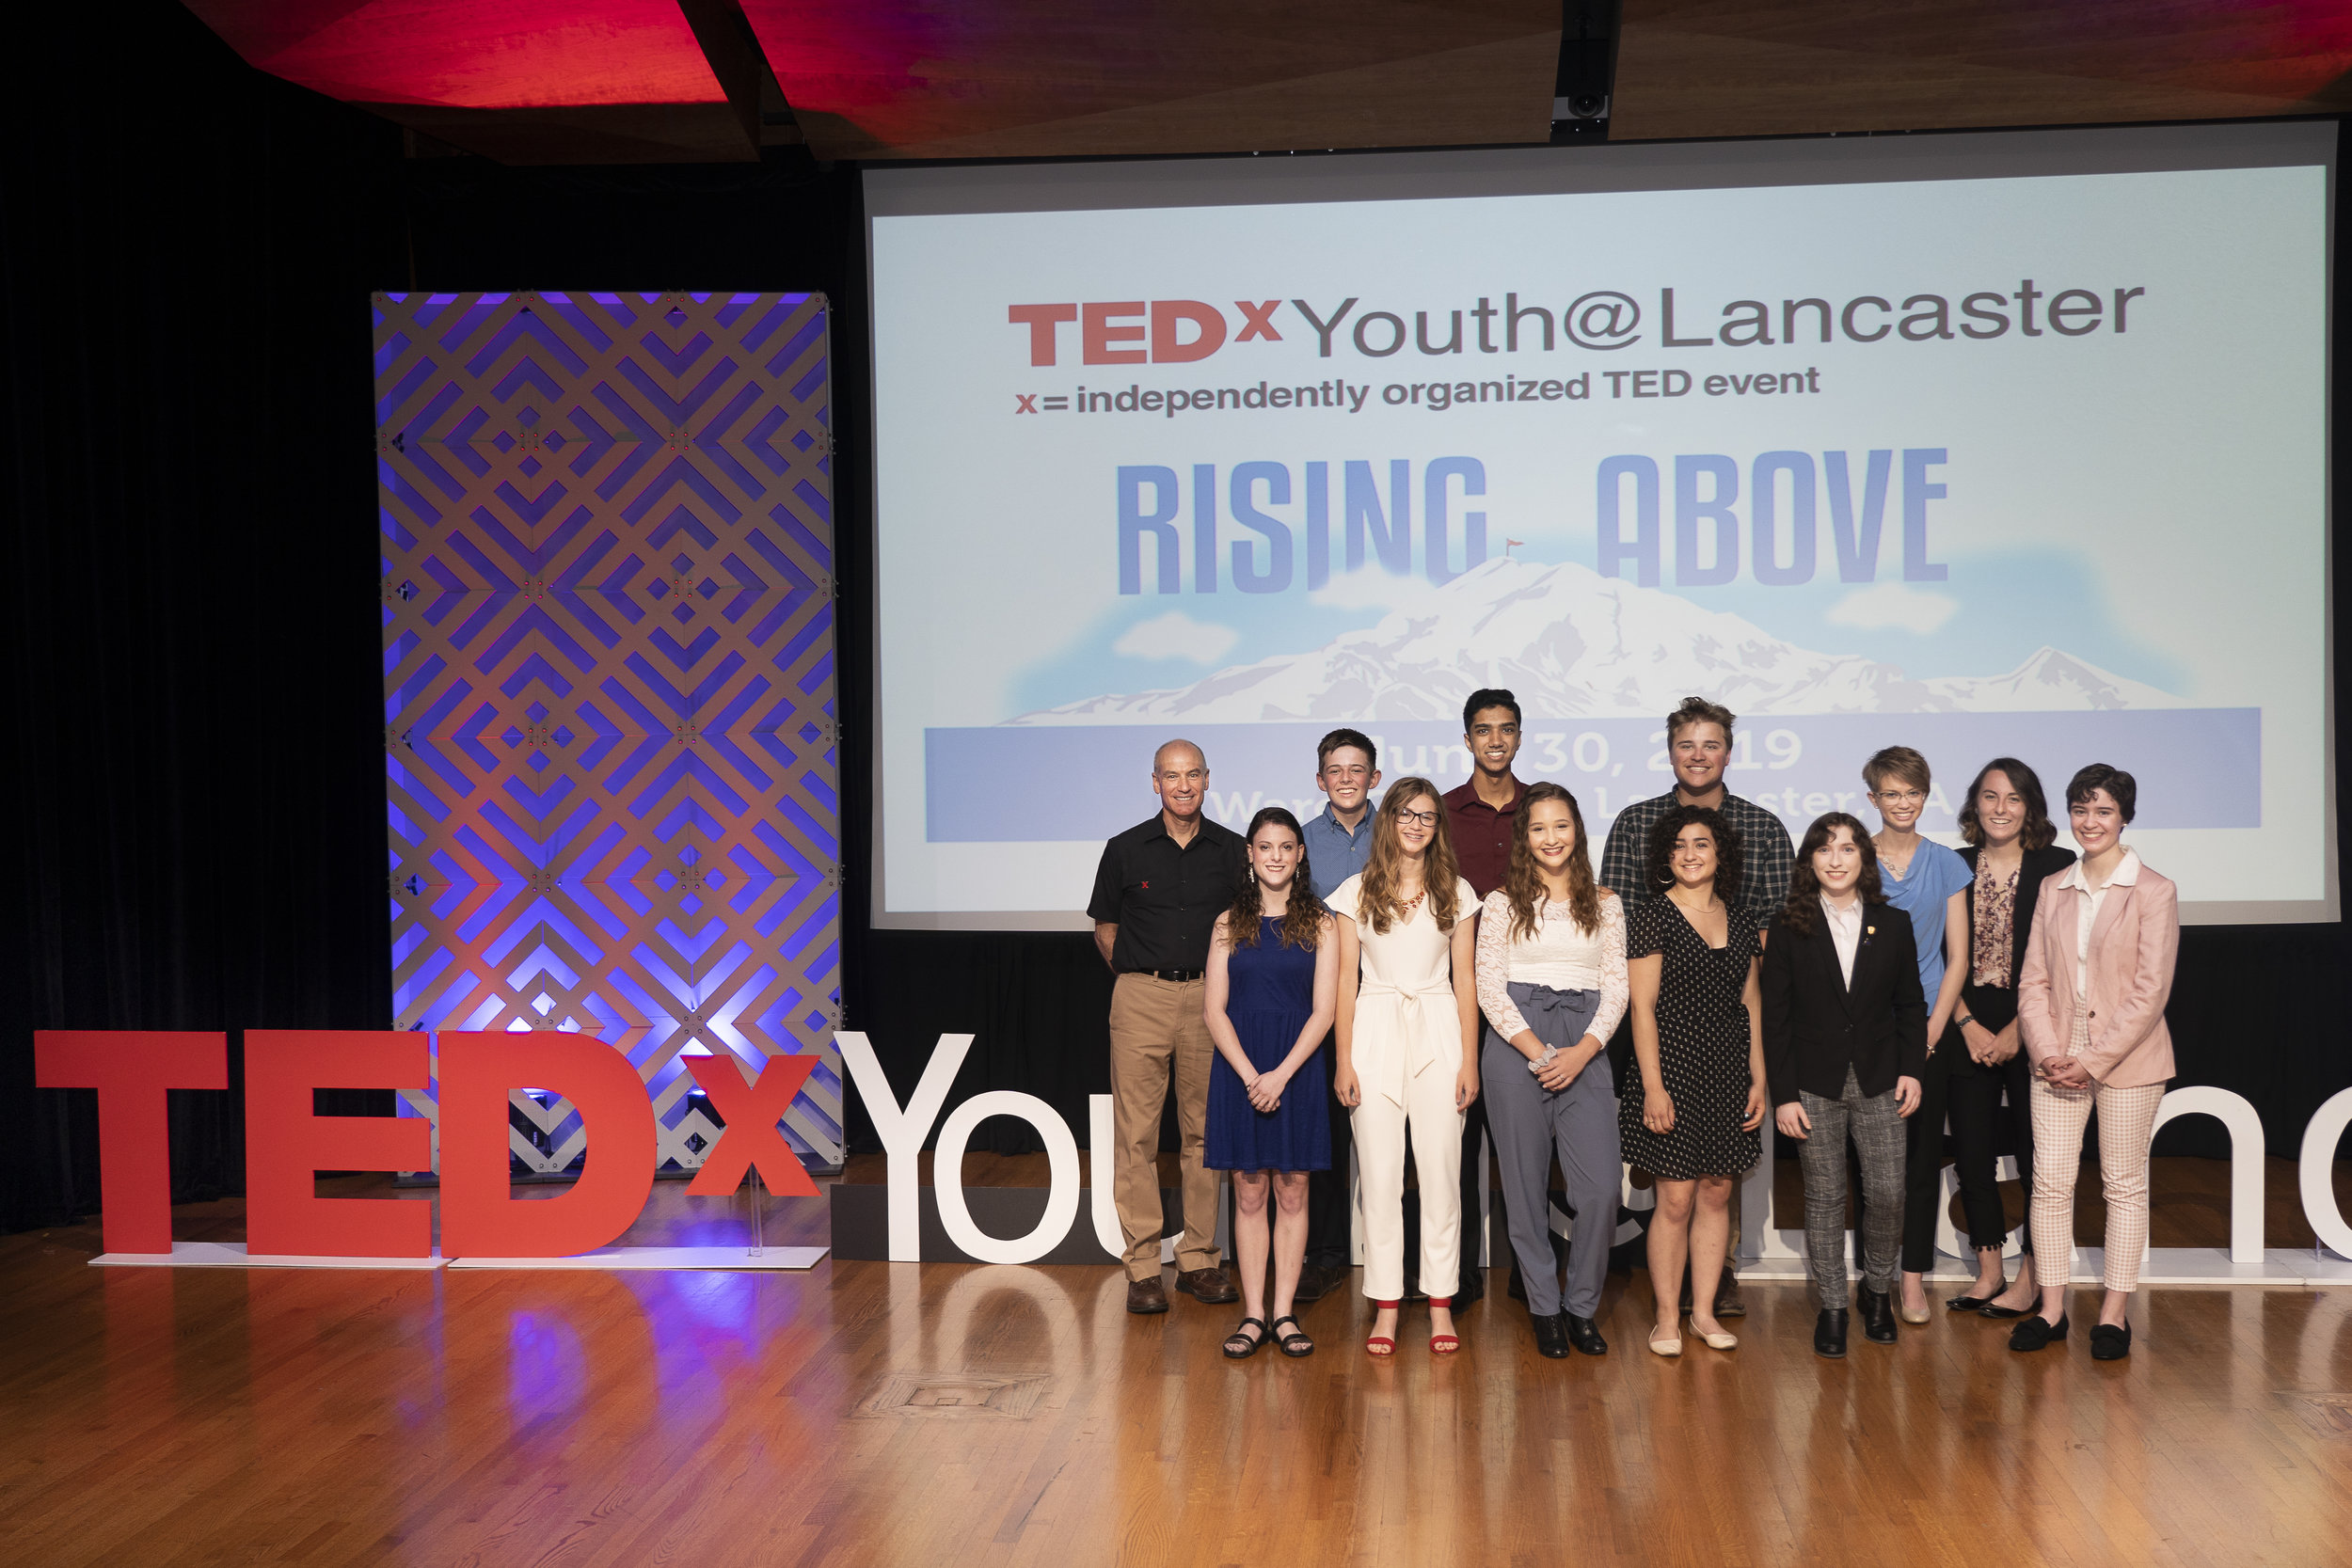 speakers-emcee-and-tedxlancaster-executive-director_48522801697_o.jpg